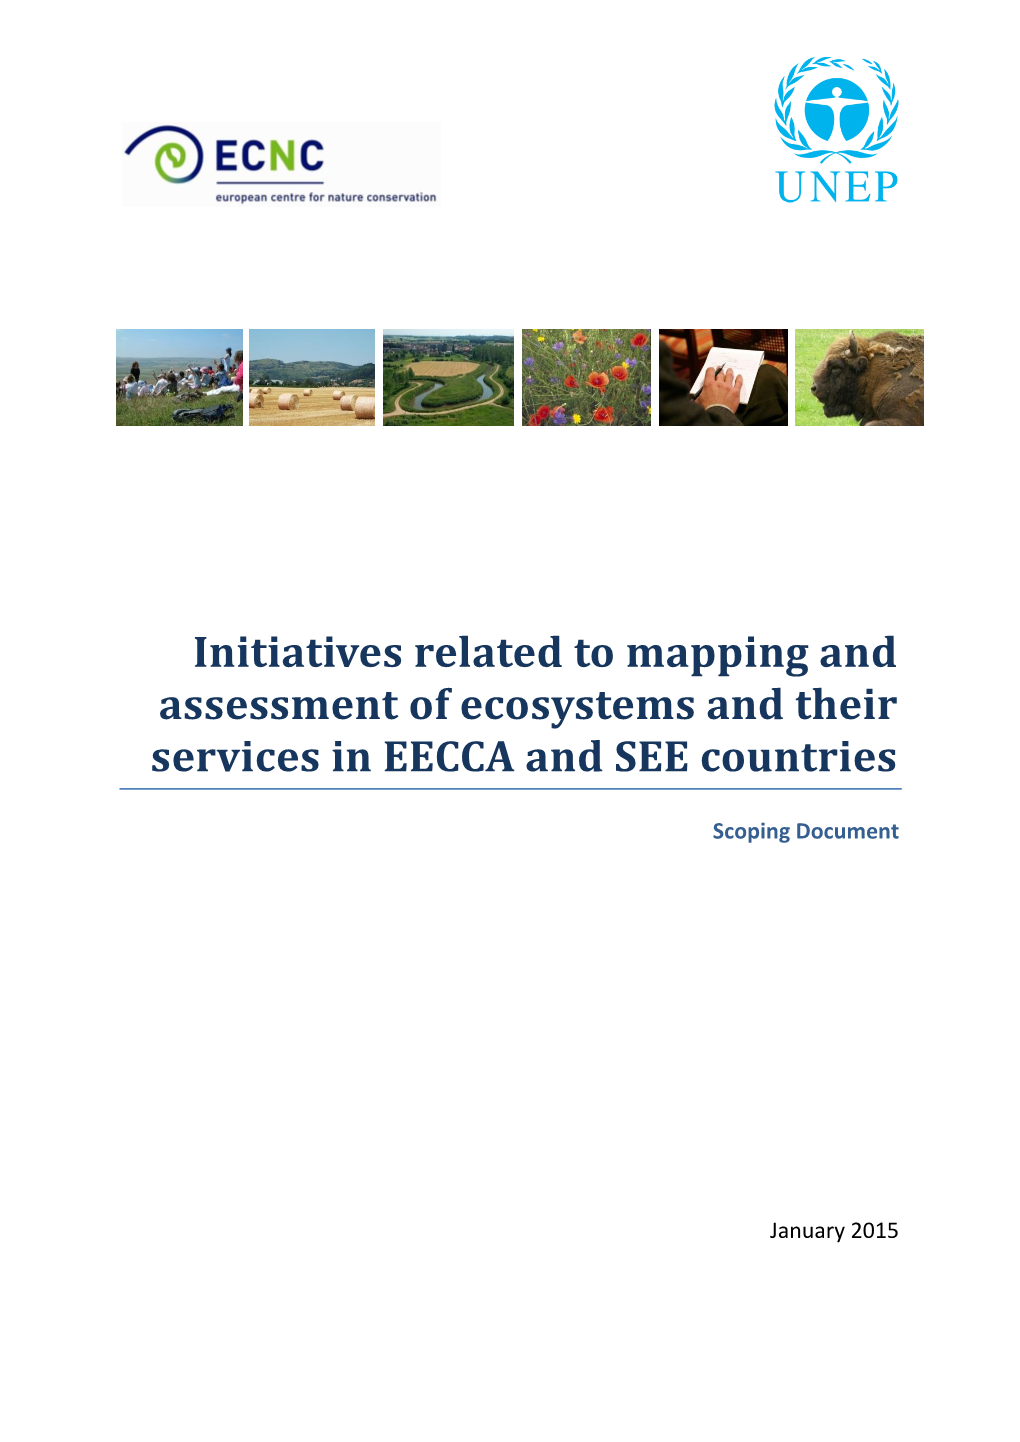 Initiatives Related to Mapping and Assessment of Ecosystems and Their Services in EECCA and SEE Countries